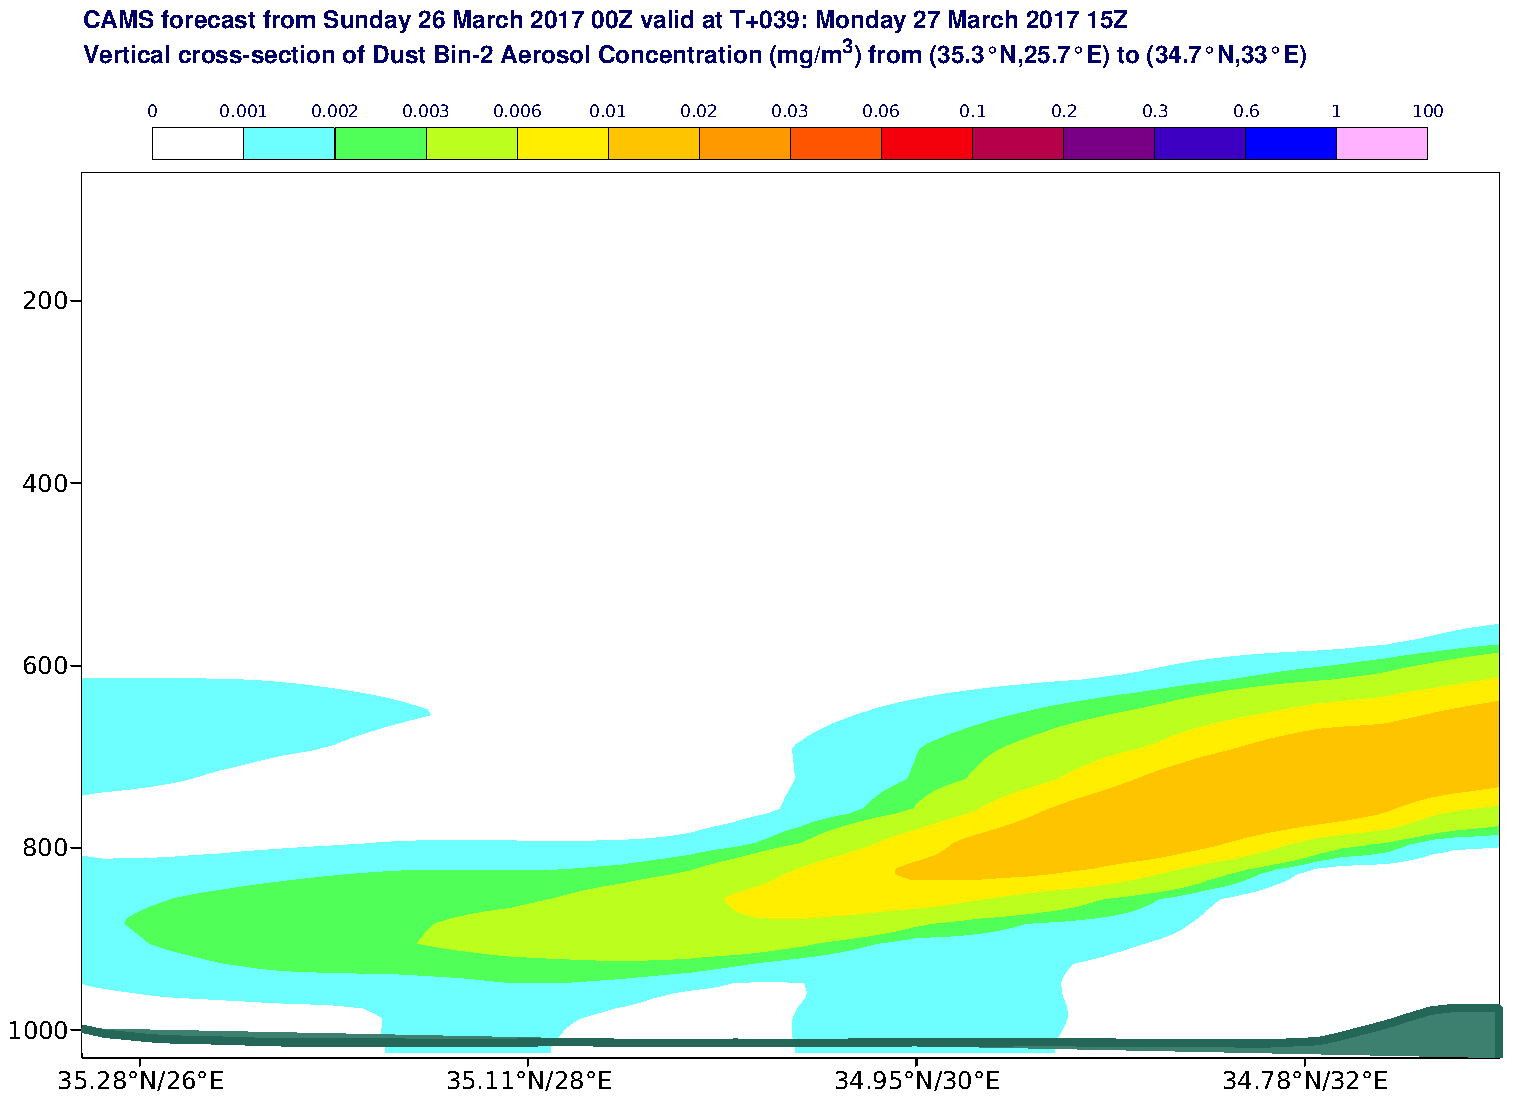 Vertical cross-section of Dust Bin-2 Aerosol Concentration (mg/m3) valid at T39 - 2017-03-27 15:00